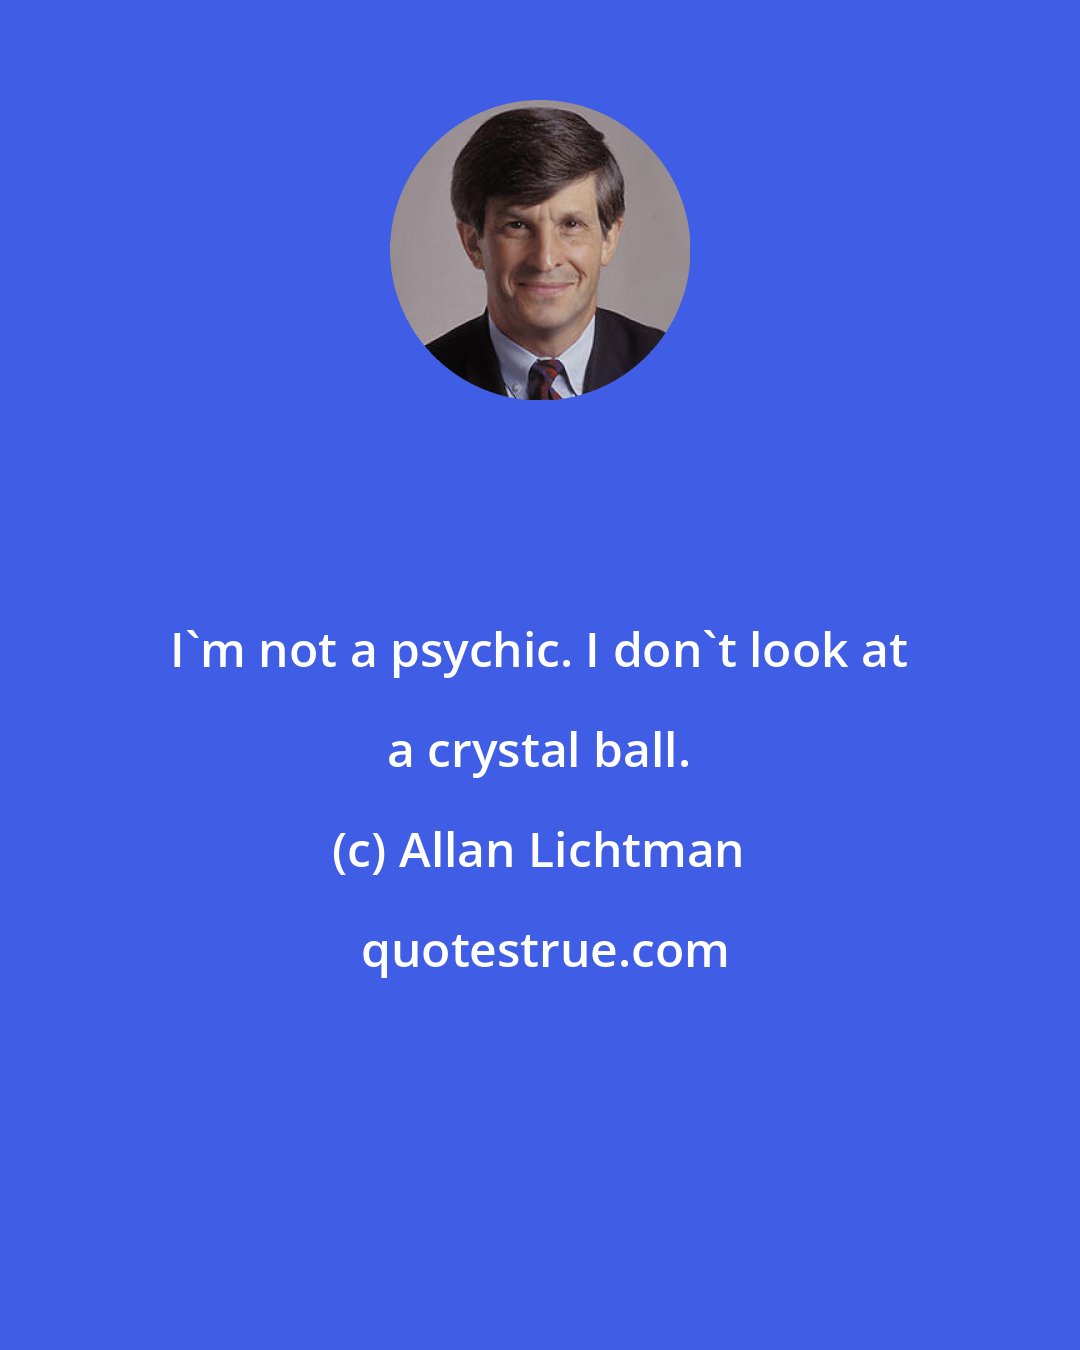 Allan Lichtman: I'm not a psychic. I don't look at a crystal ball.